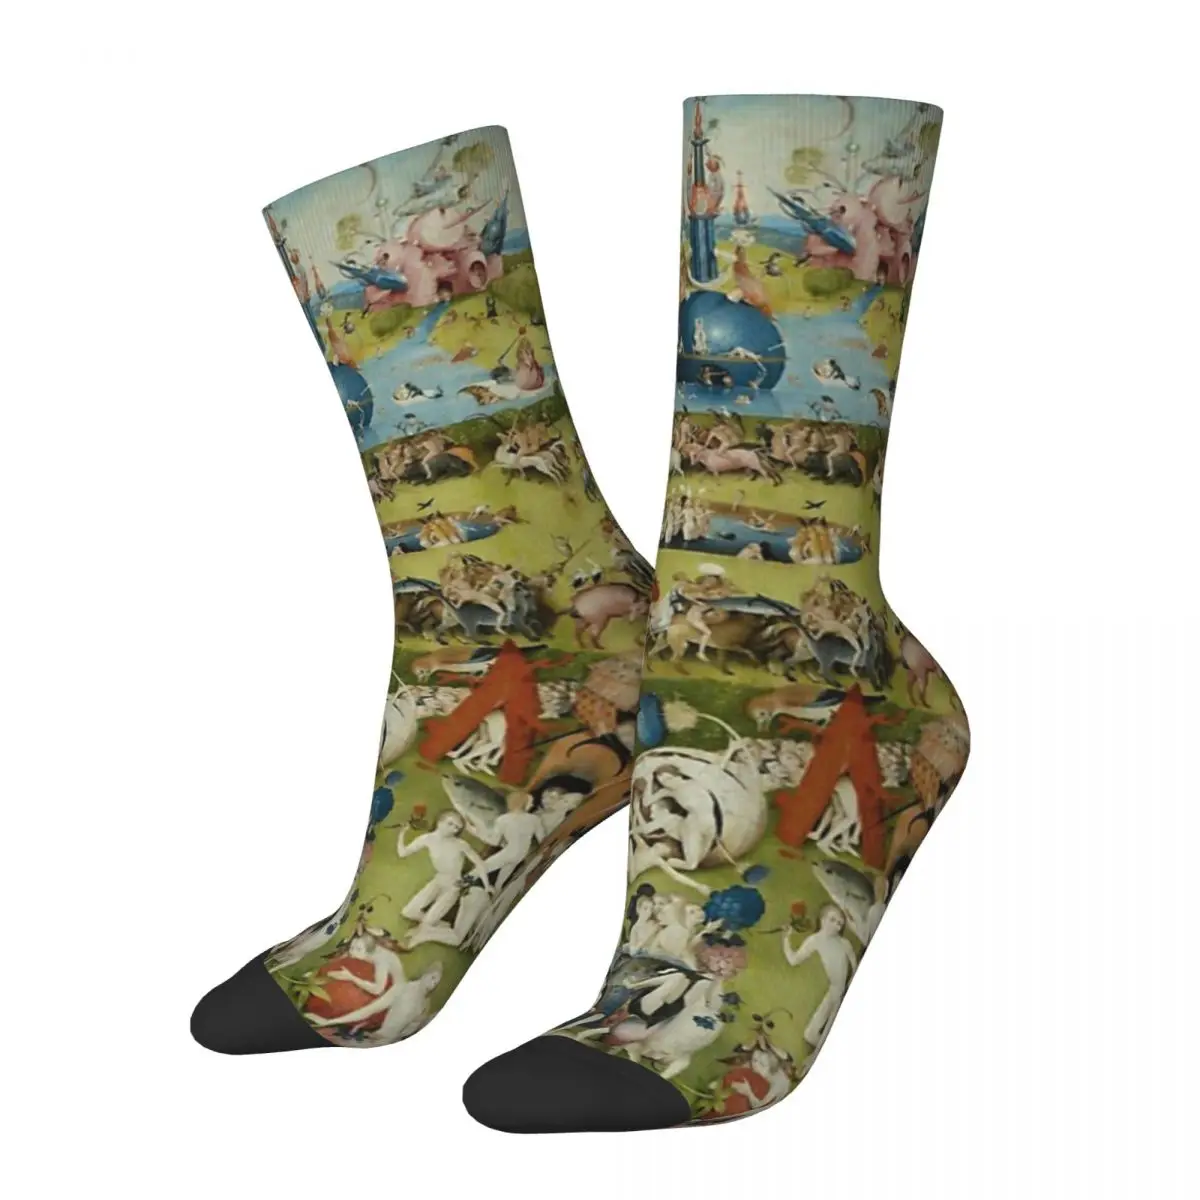 

BOSCH, Hieronymus - Triptych Of Garden Of Earthly Delight Socks Sweat Absorbing Stockings Socks Accessories for Birthday Present